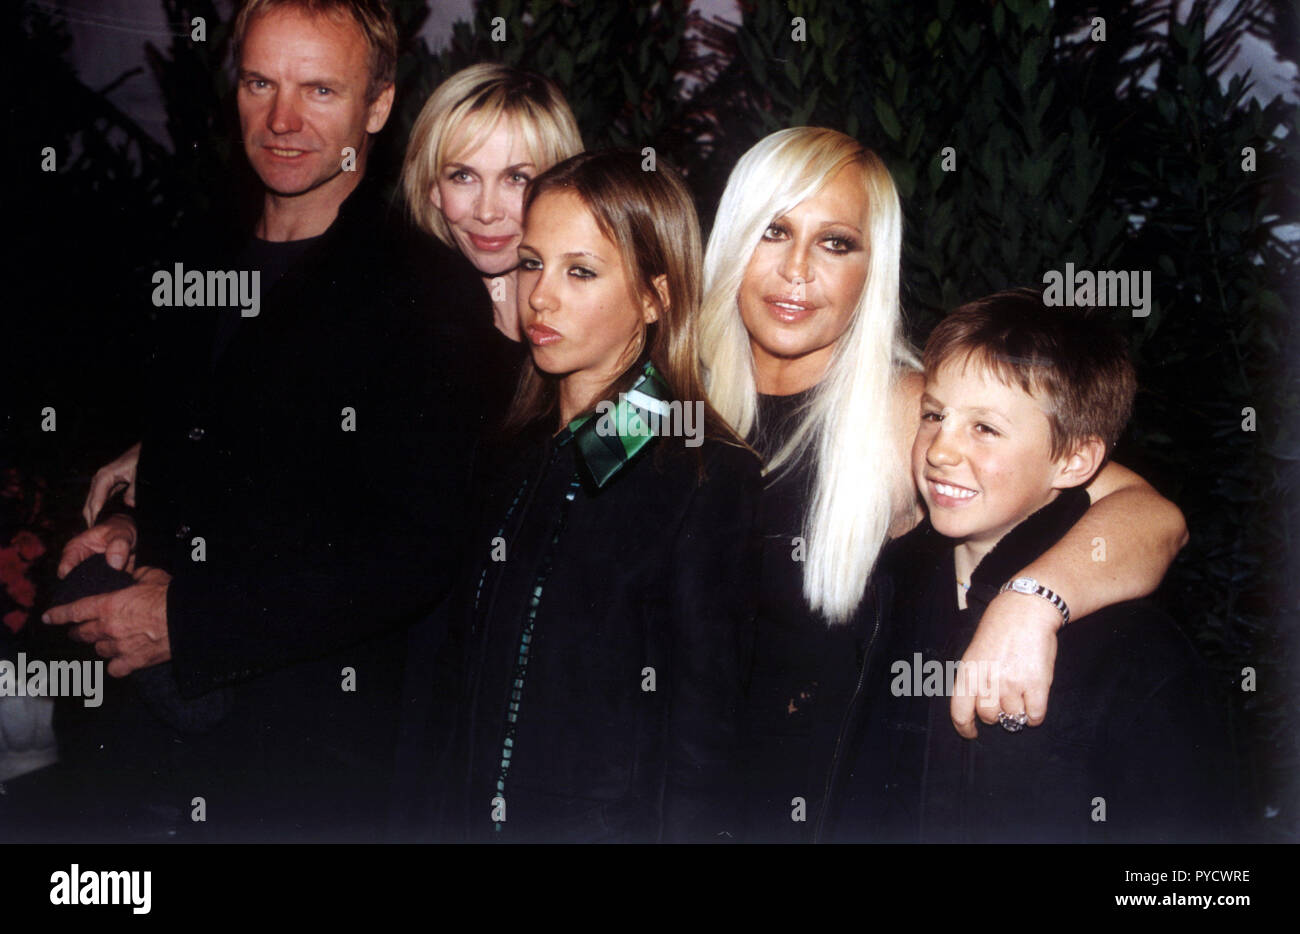 STING AND WIFE TRUDIE STYLER WITH DONATELLA VERSACE AND SONS DANIEL AND  ALLEGRA AT THE VERSACE BACKSTAGE FASHION PARTY Featuring: Donatella Versace,  Sting, Gordon Sumner, Trudie Styler, Allegra Versace, Daniel Versace Where: